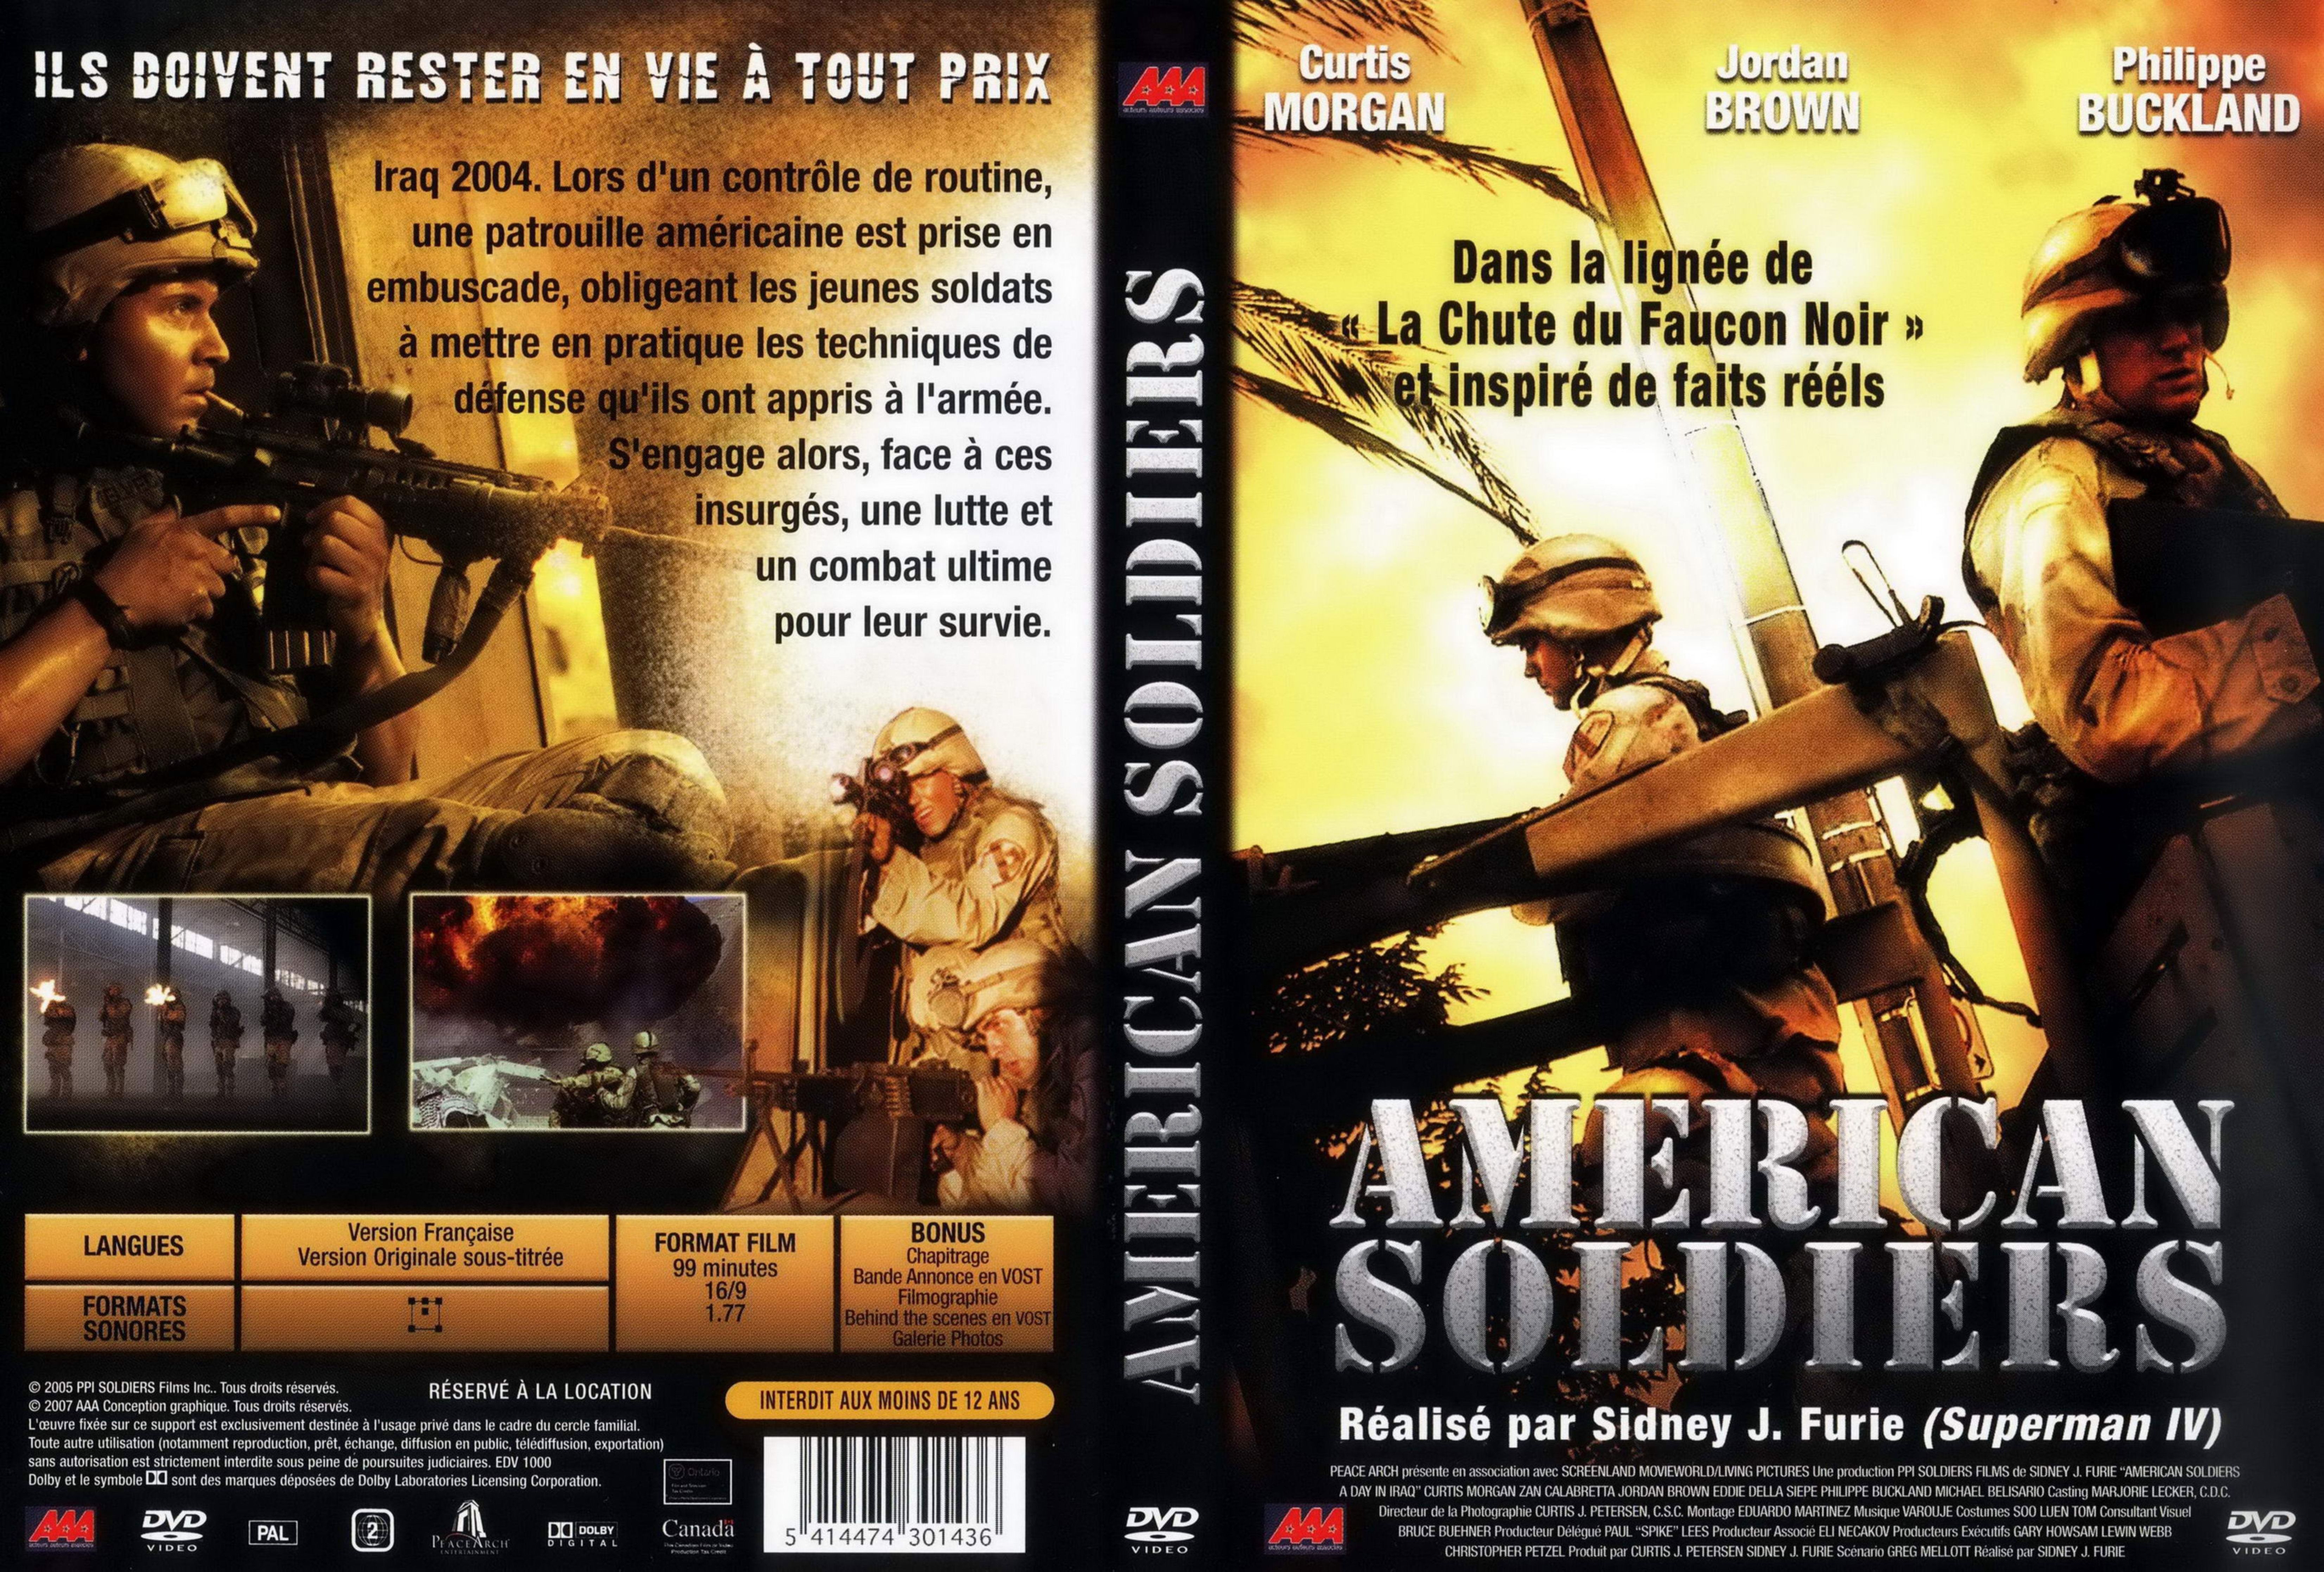 Jaquette DVD American soldiers v2